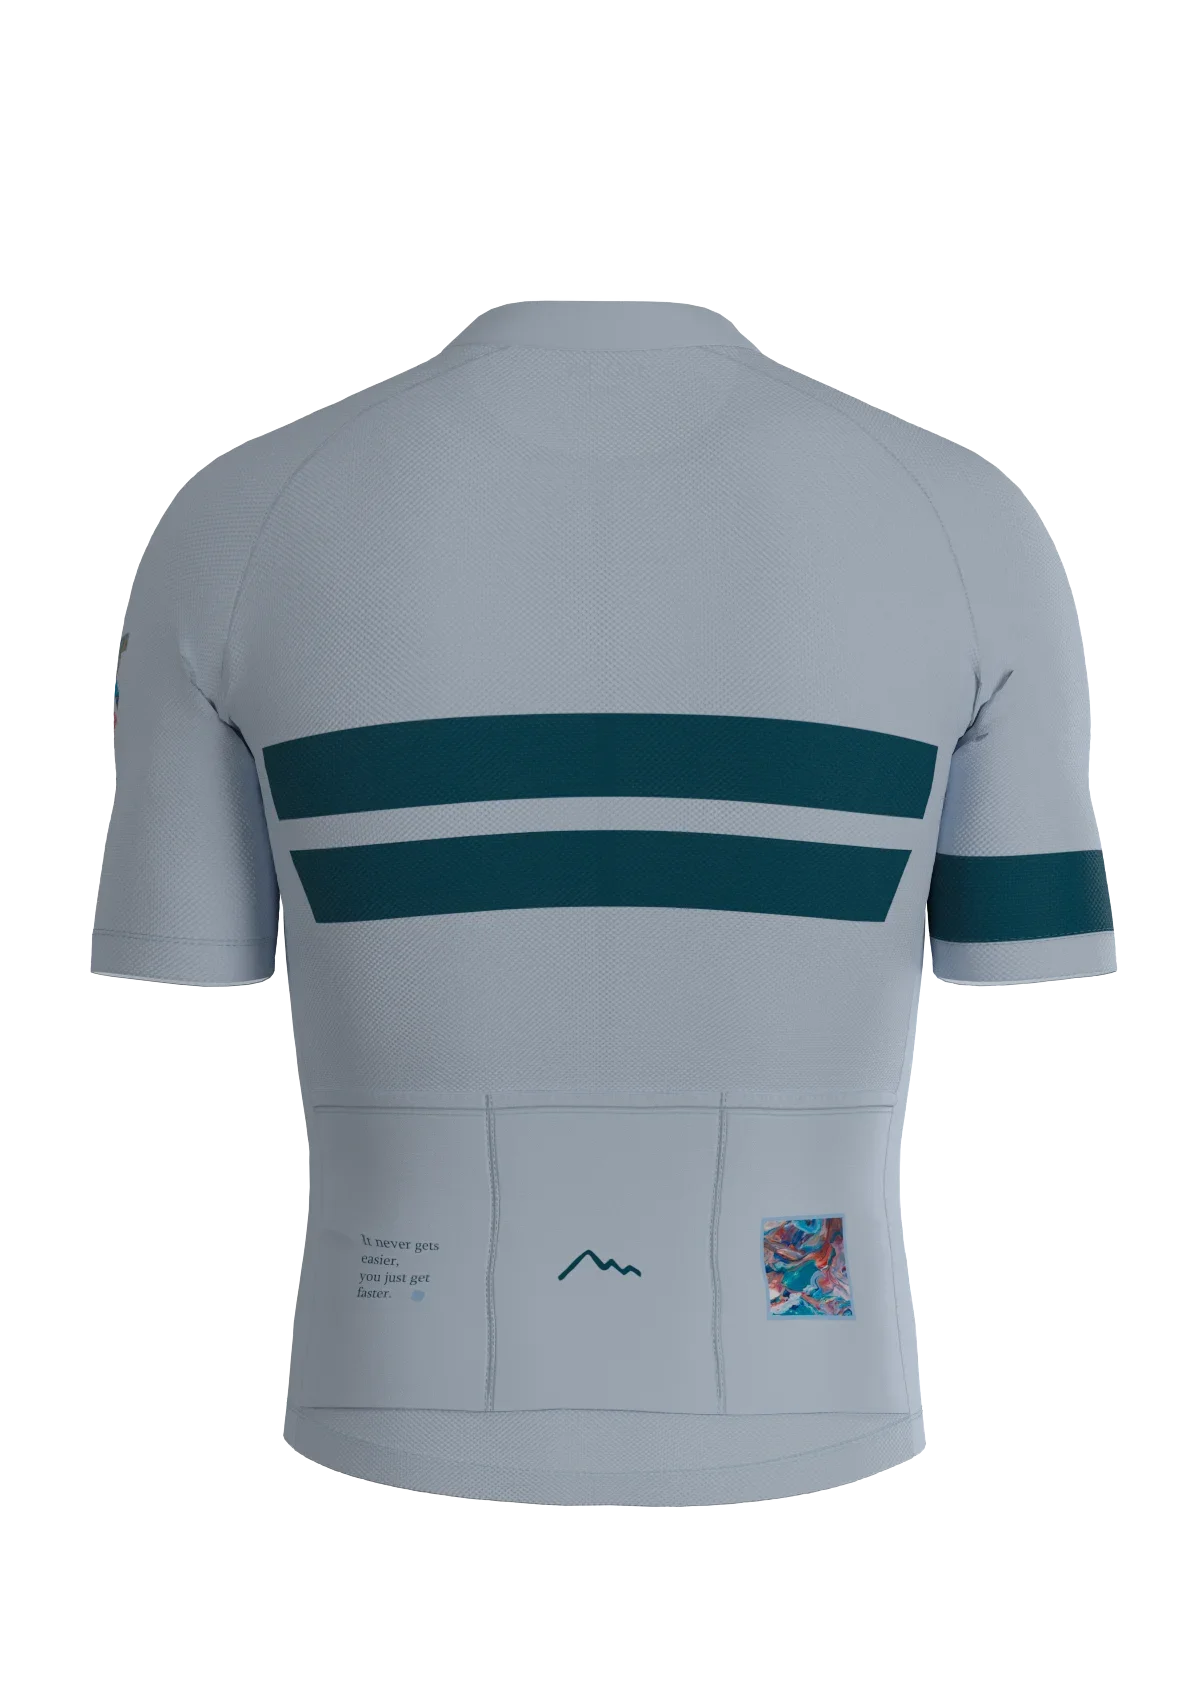 Classic Ice-Blue cycling jersey